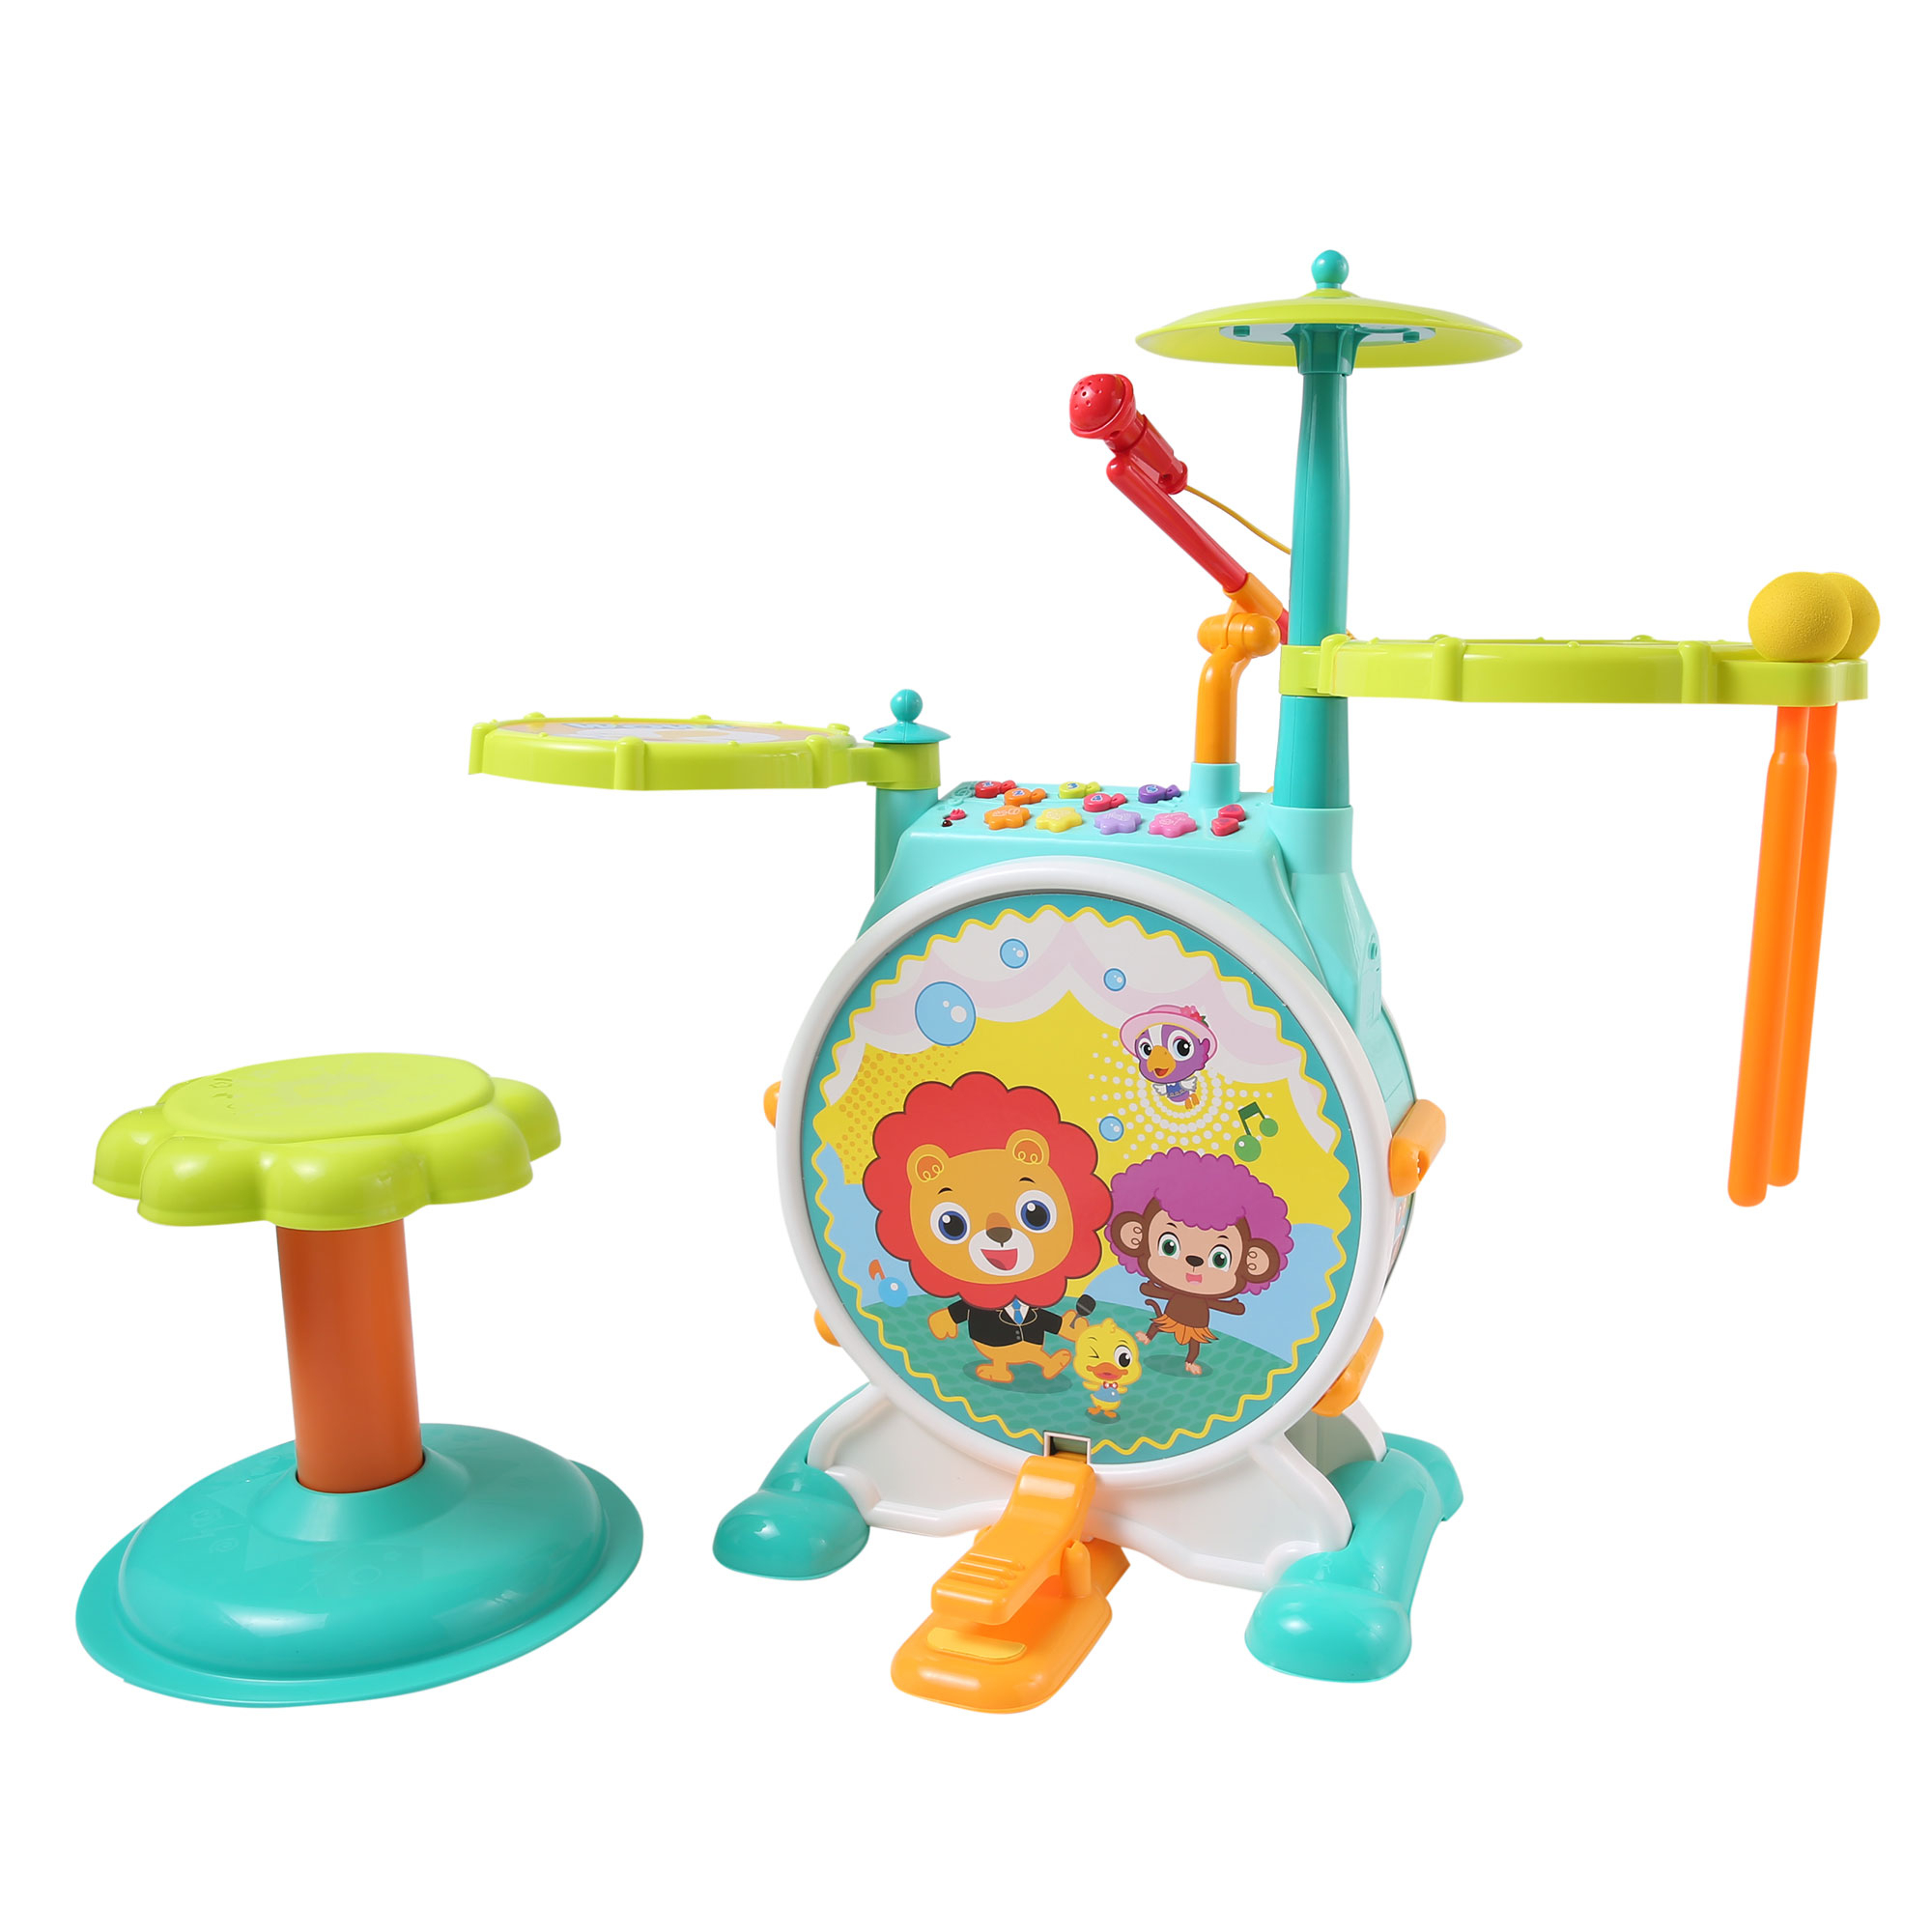 Dimple Electric Big Toy Drum Set For Kids With Microphone Pedal N Stool - Pre Recorded Songs Instruments Music Lights N Sounds